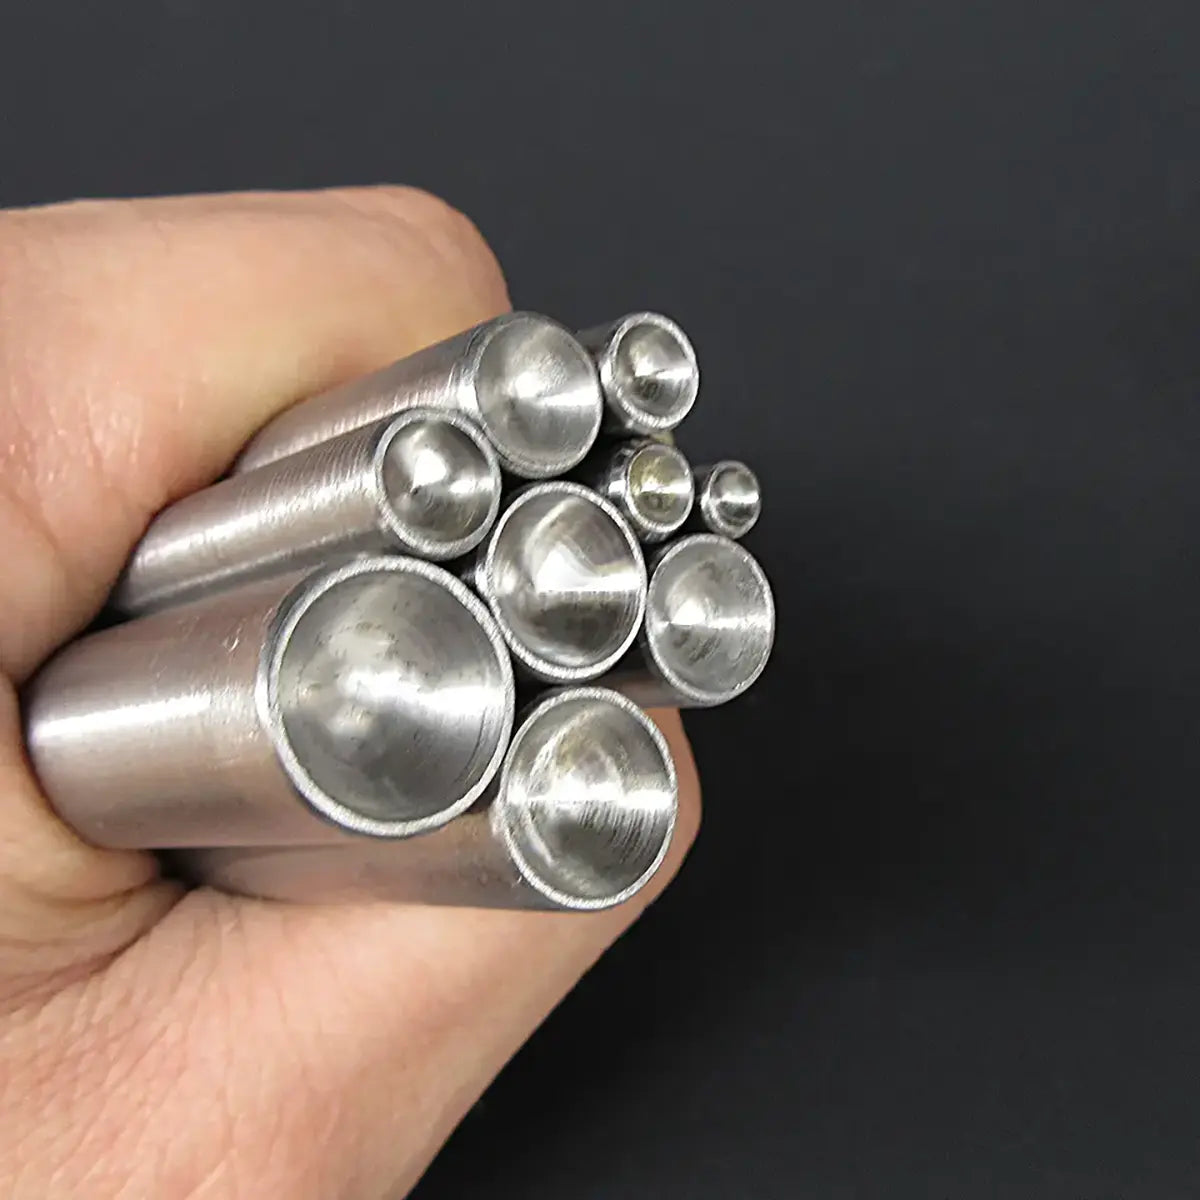 Domed Rivet Punches